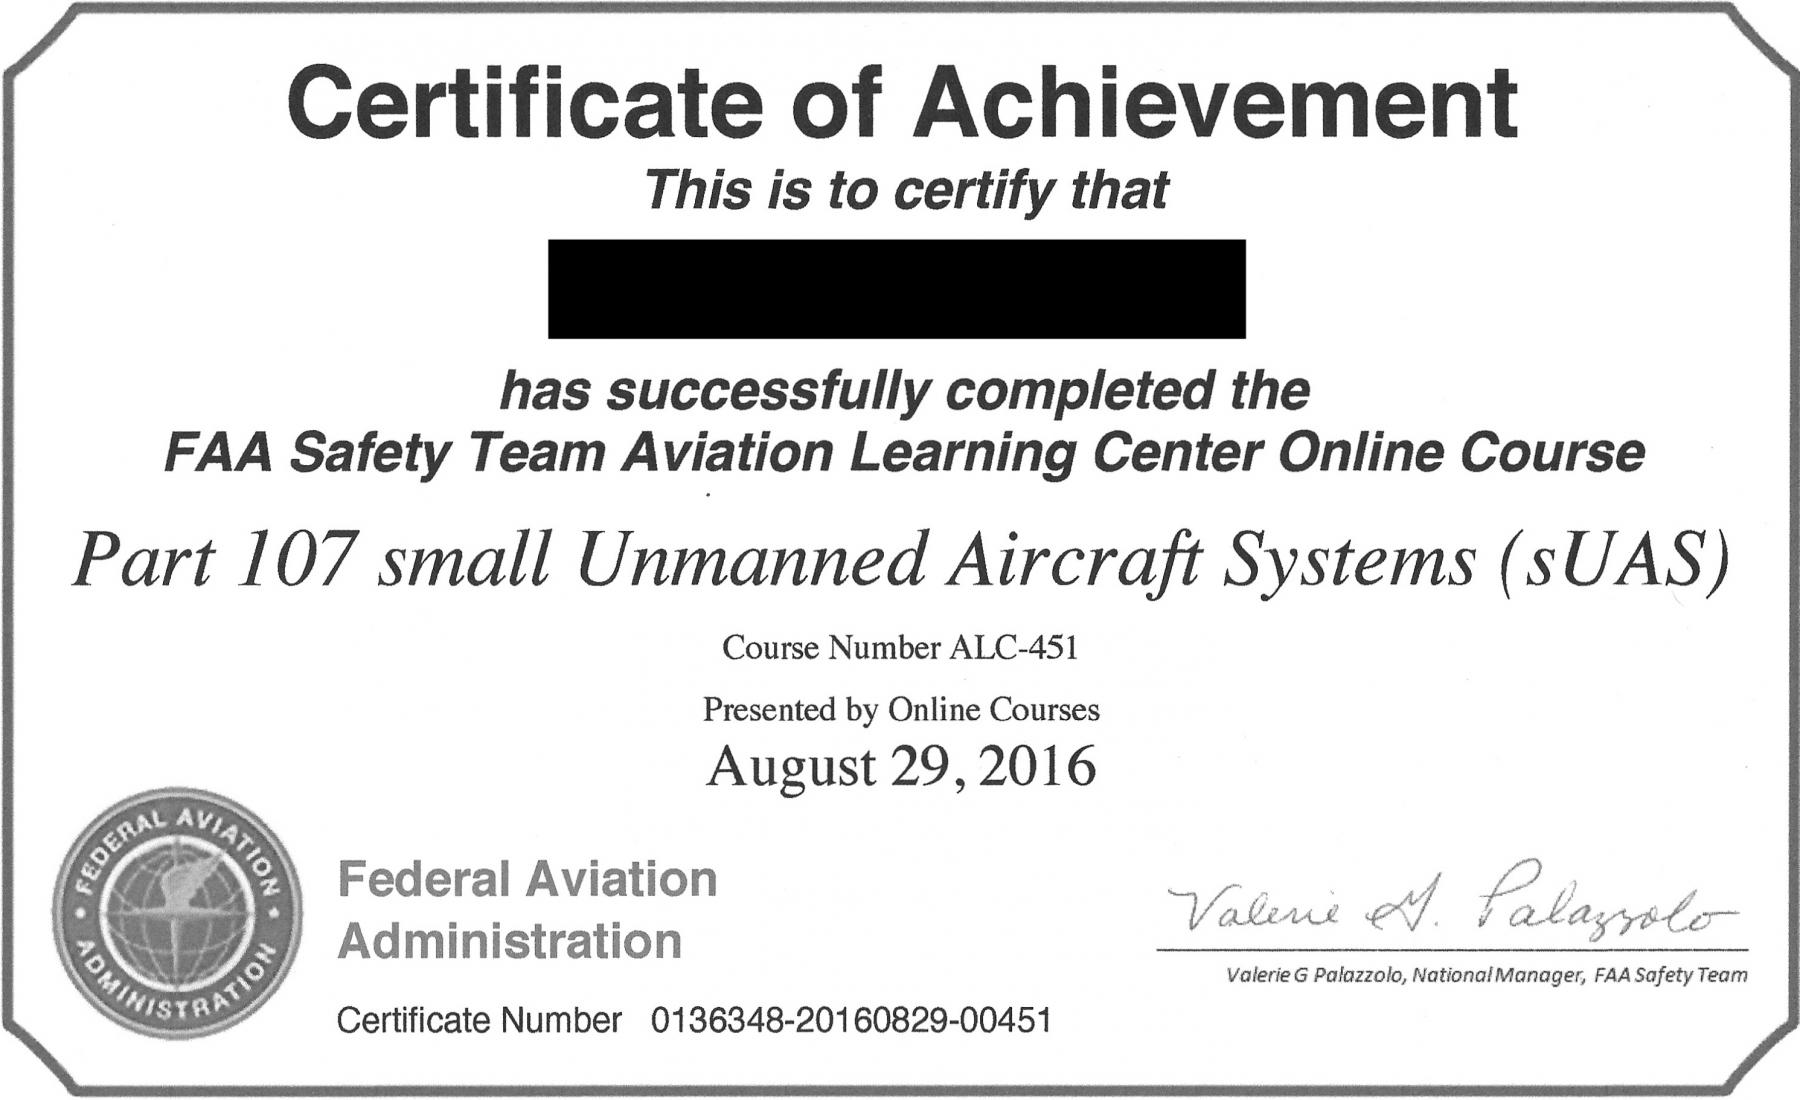 The image is an example of the pilot airman license to fly a drone